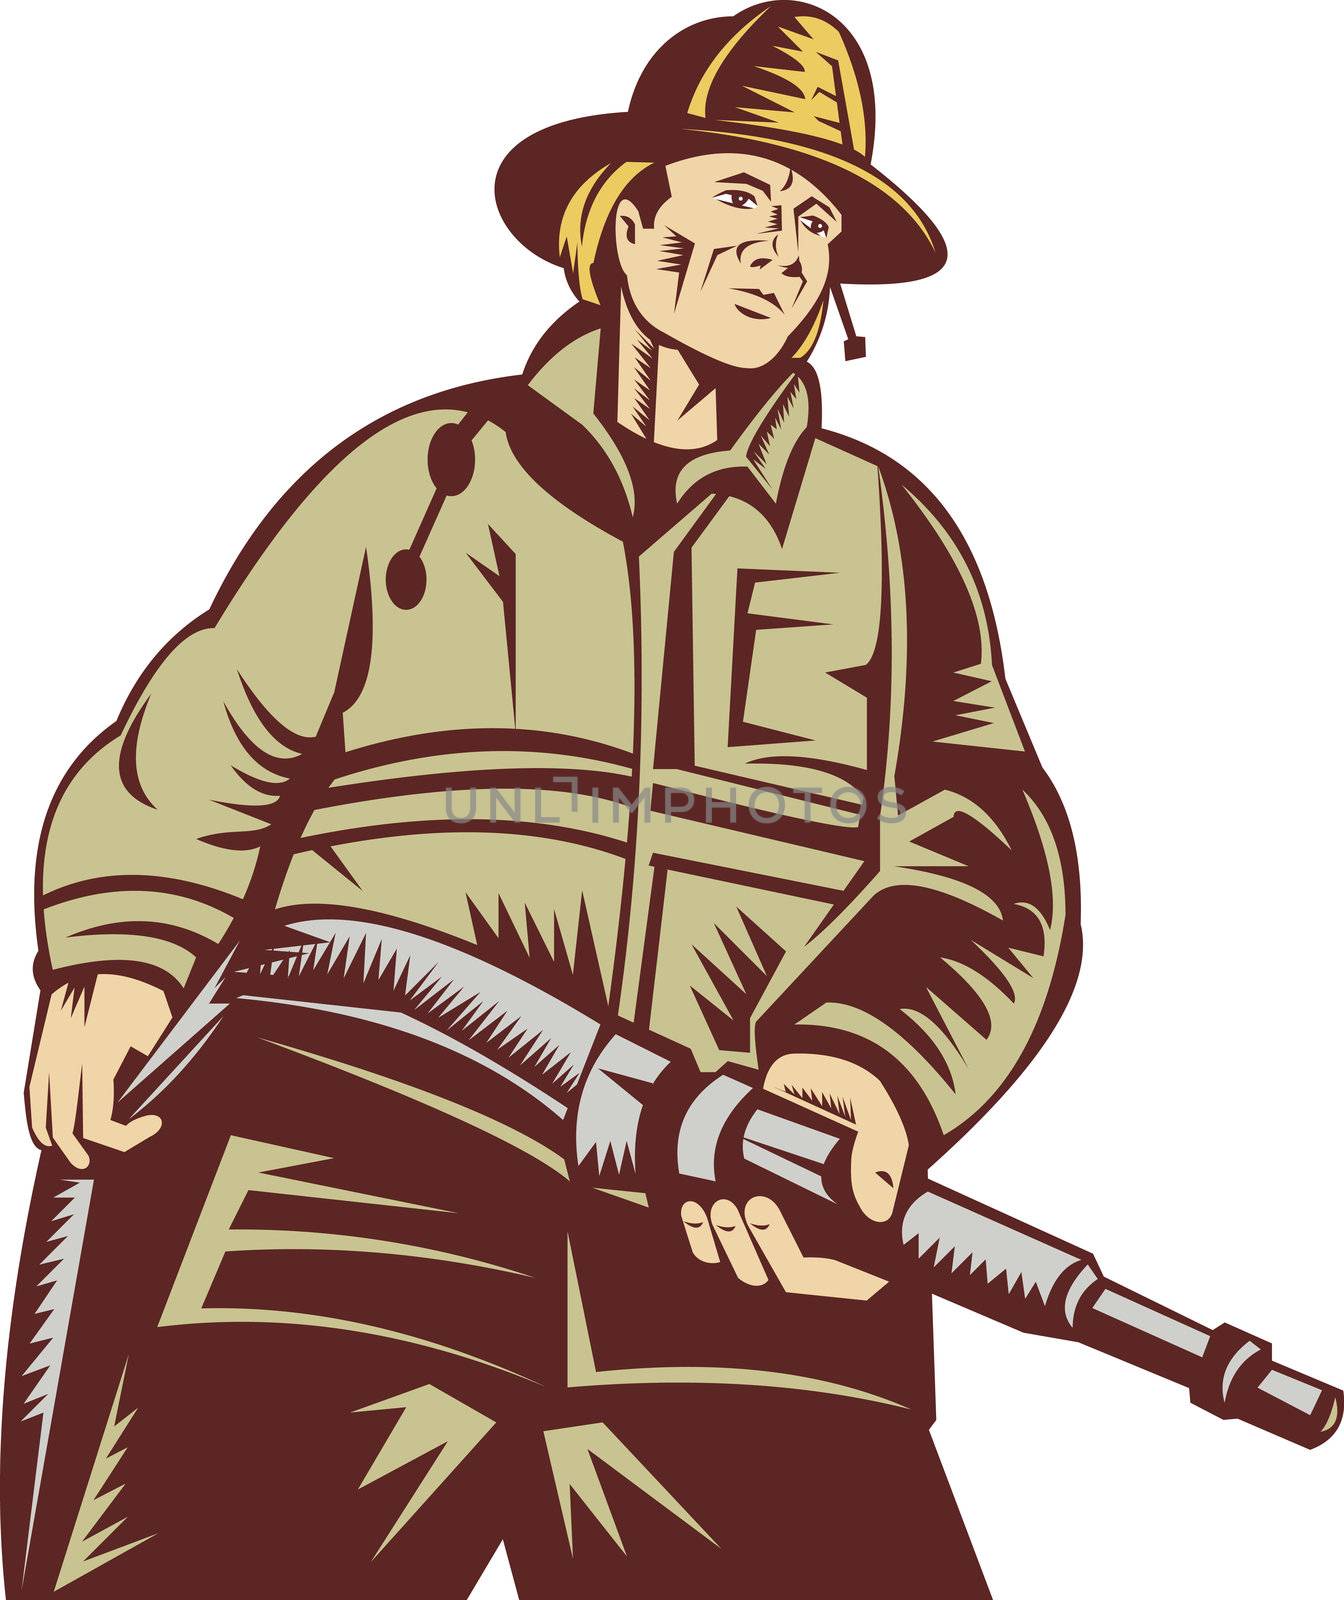 illustration of a Firefighter carrying a hose viewed from a low angle done in woodcut style